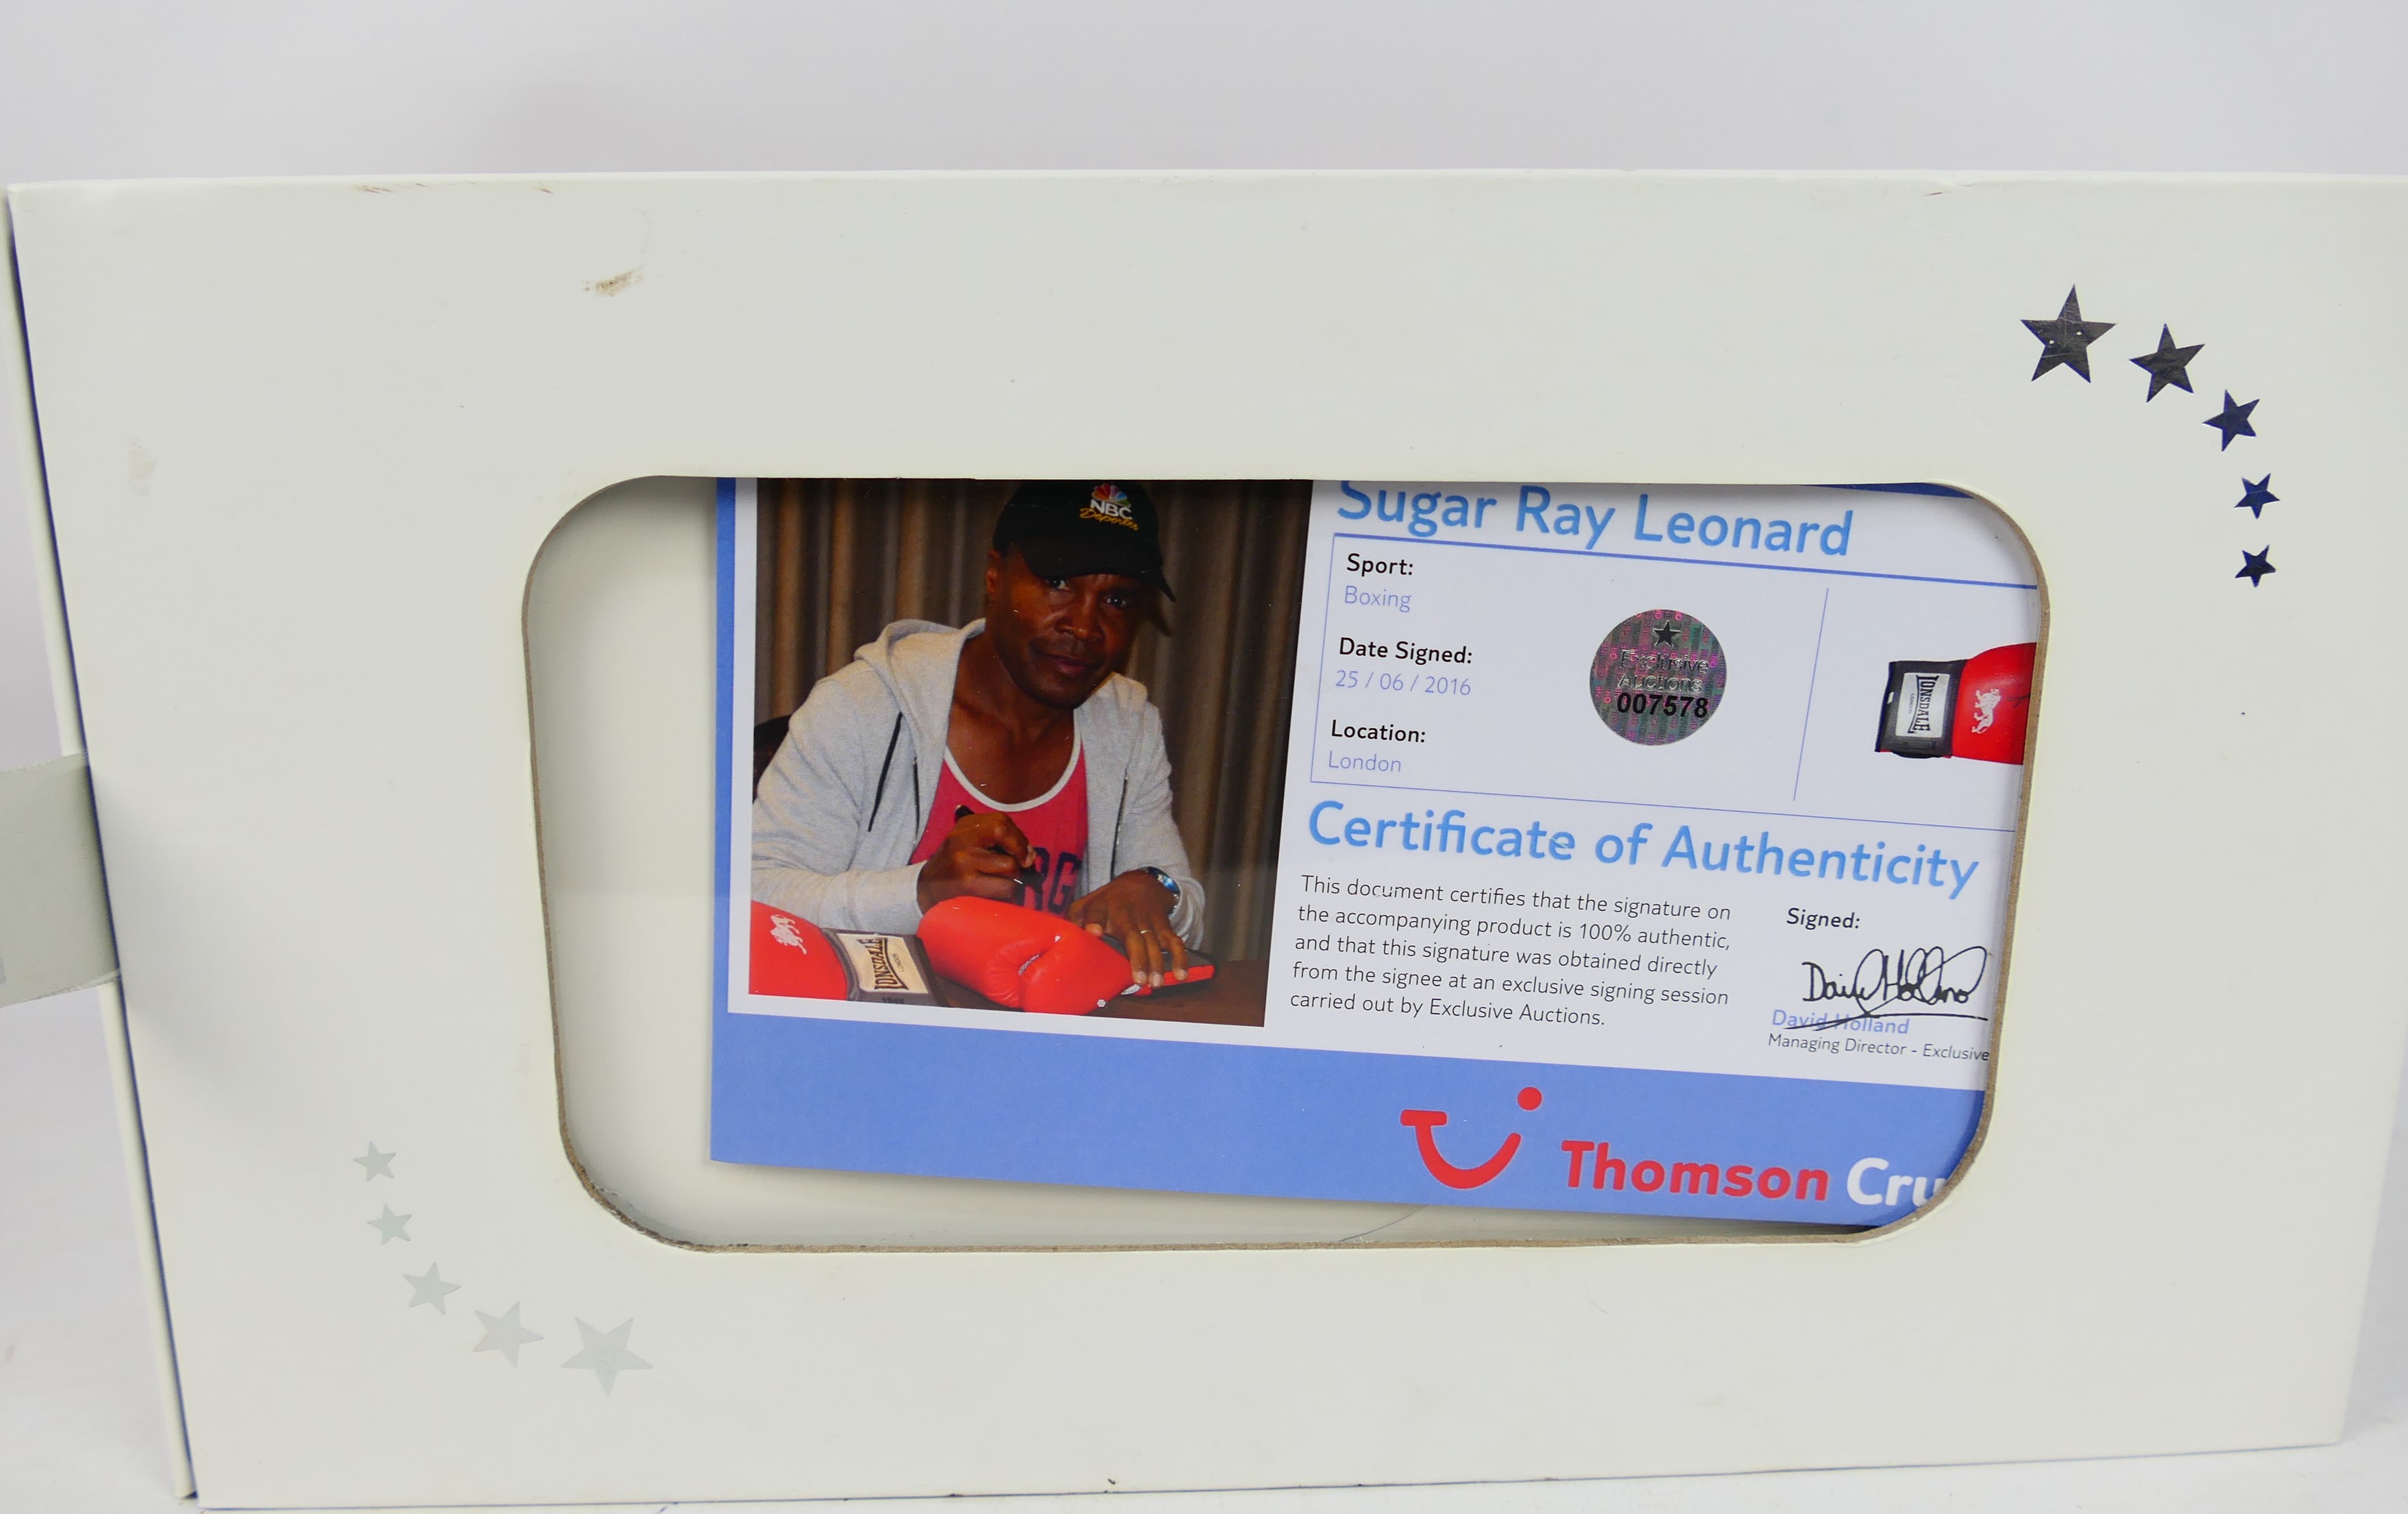 Boxing Interest - A red Lonsdale boxing glove signed by Sugar Ray Leonard (Ray Charles Leonard) - Image 2 of 5